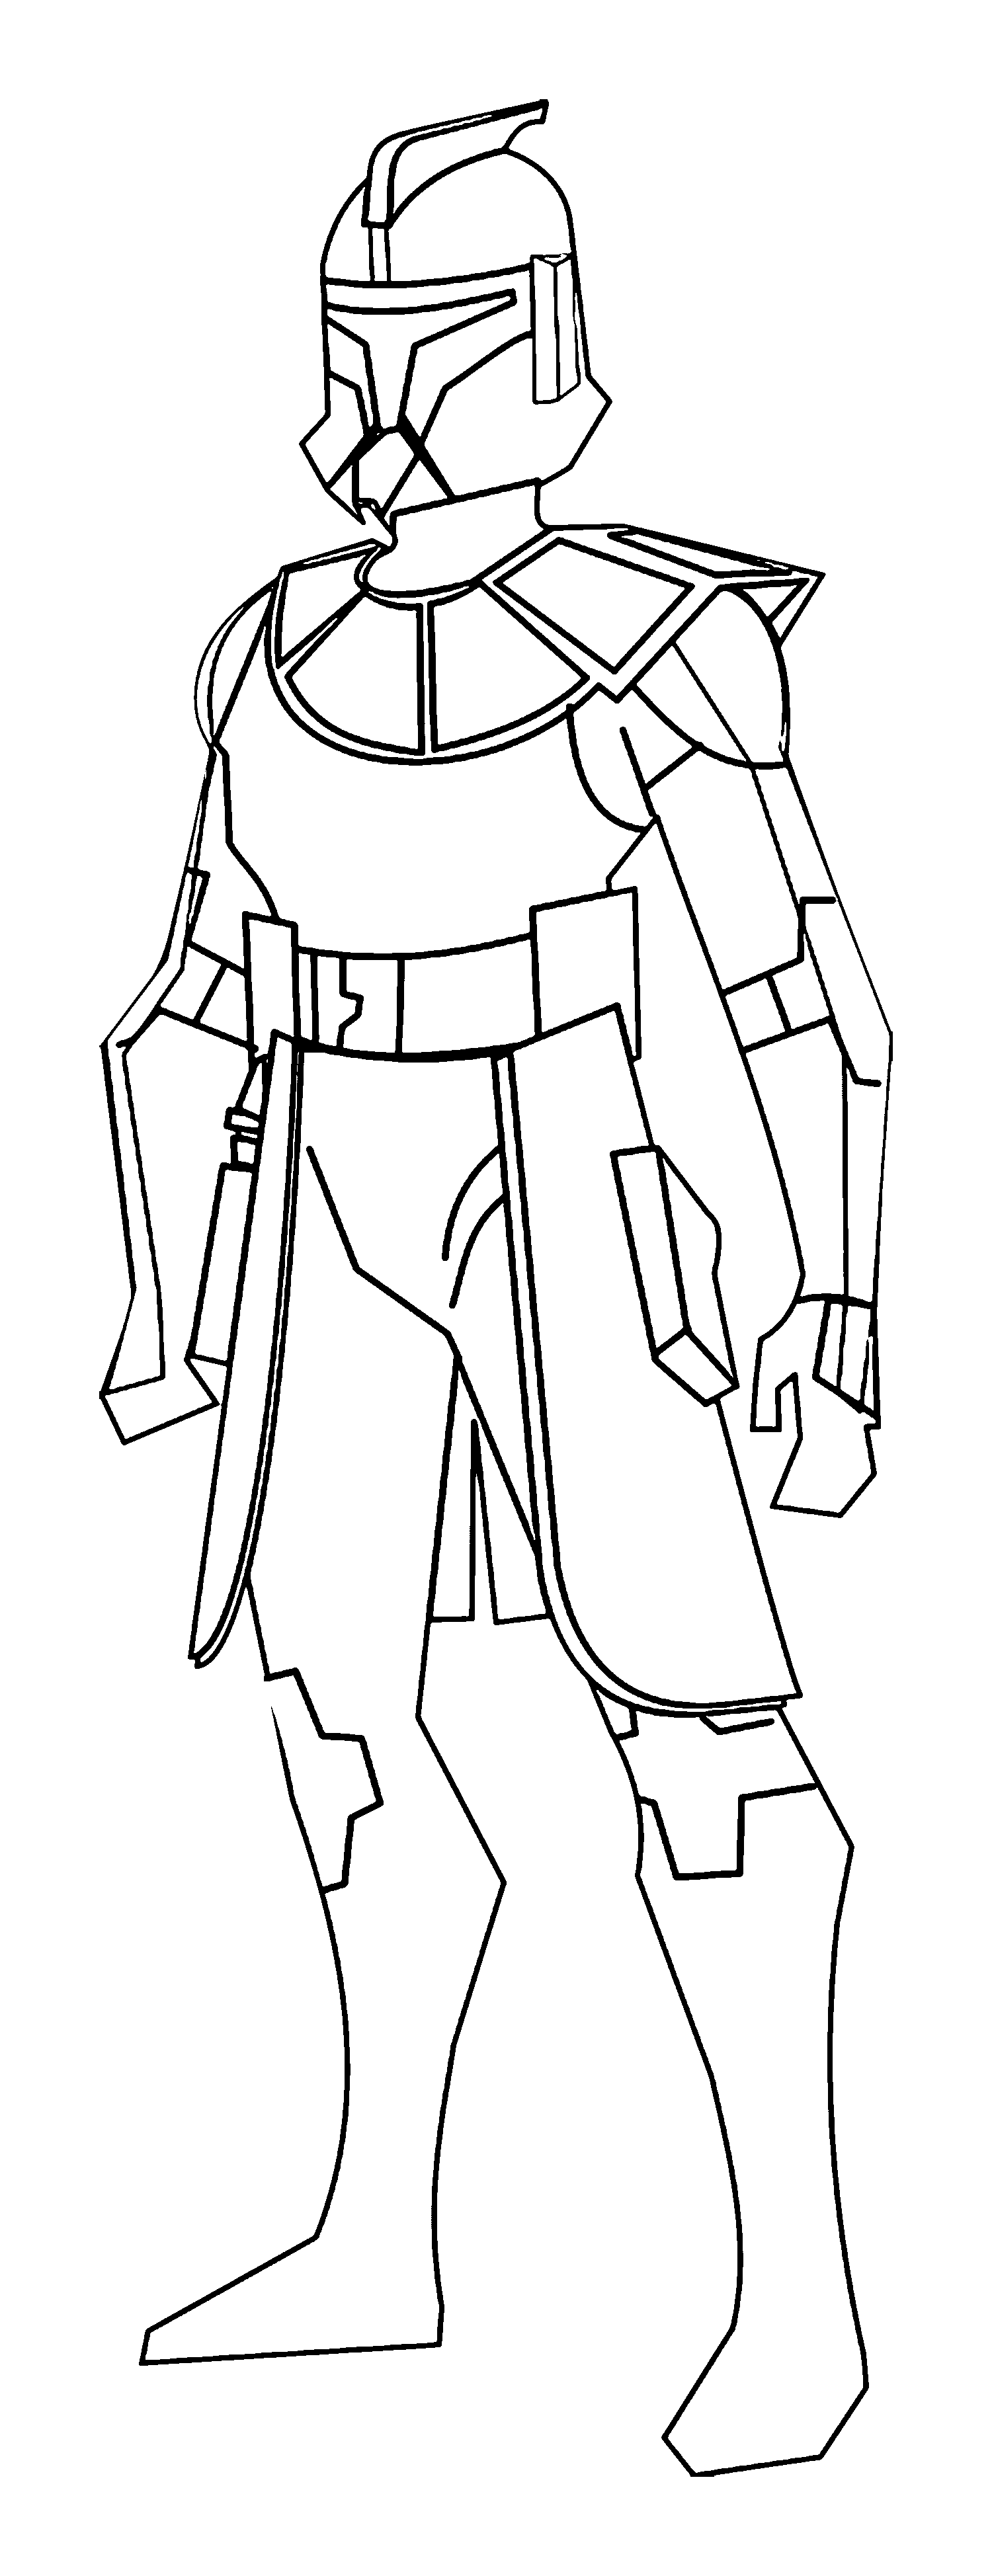 Download Trooper Coloring Page - Coloring Home